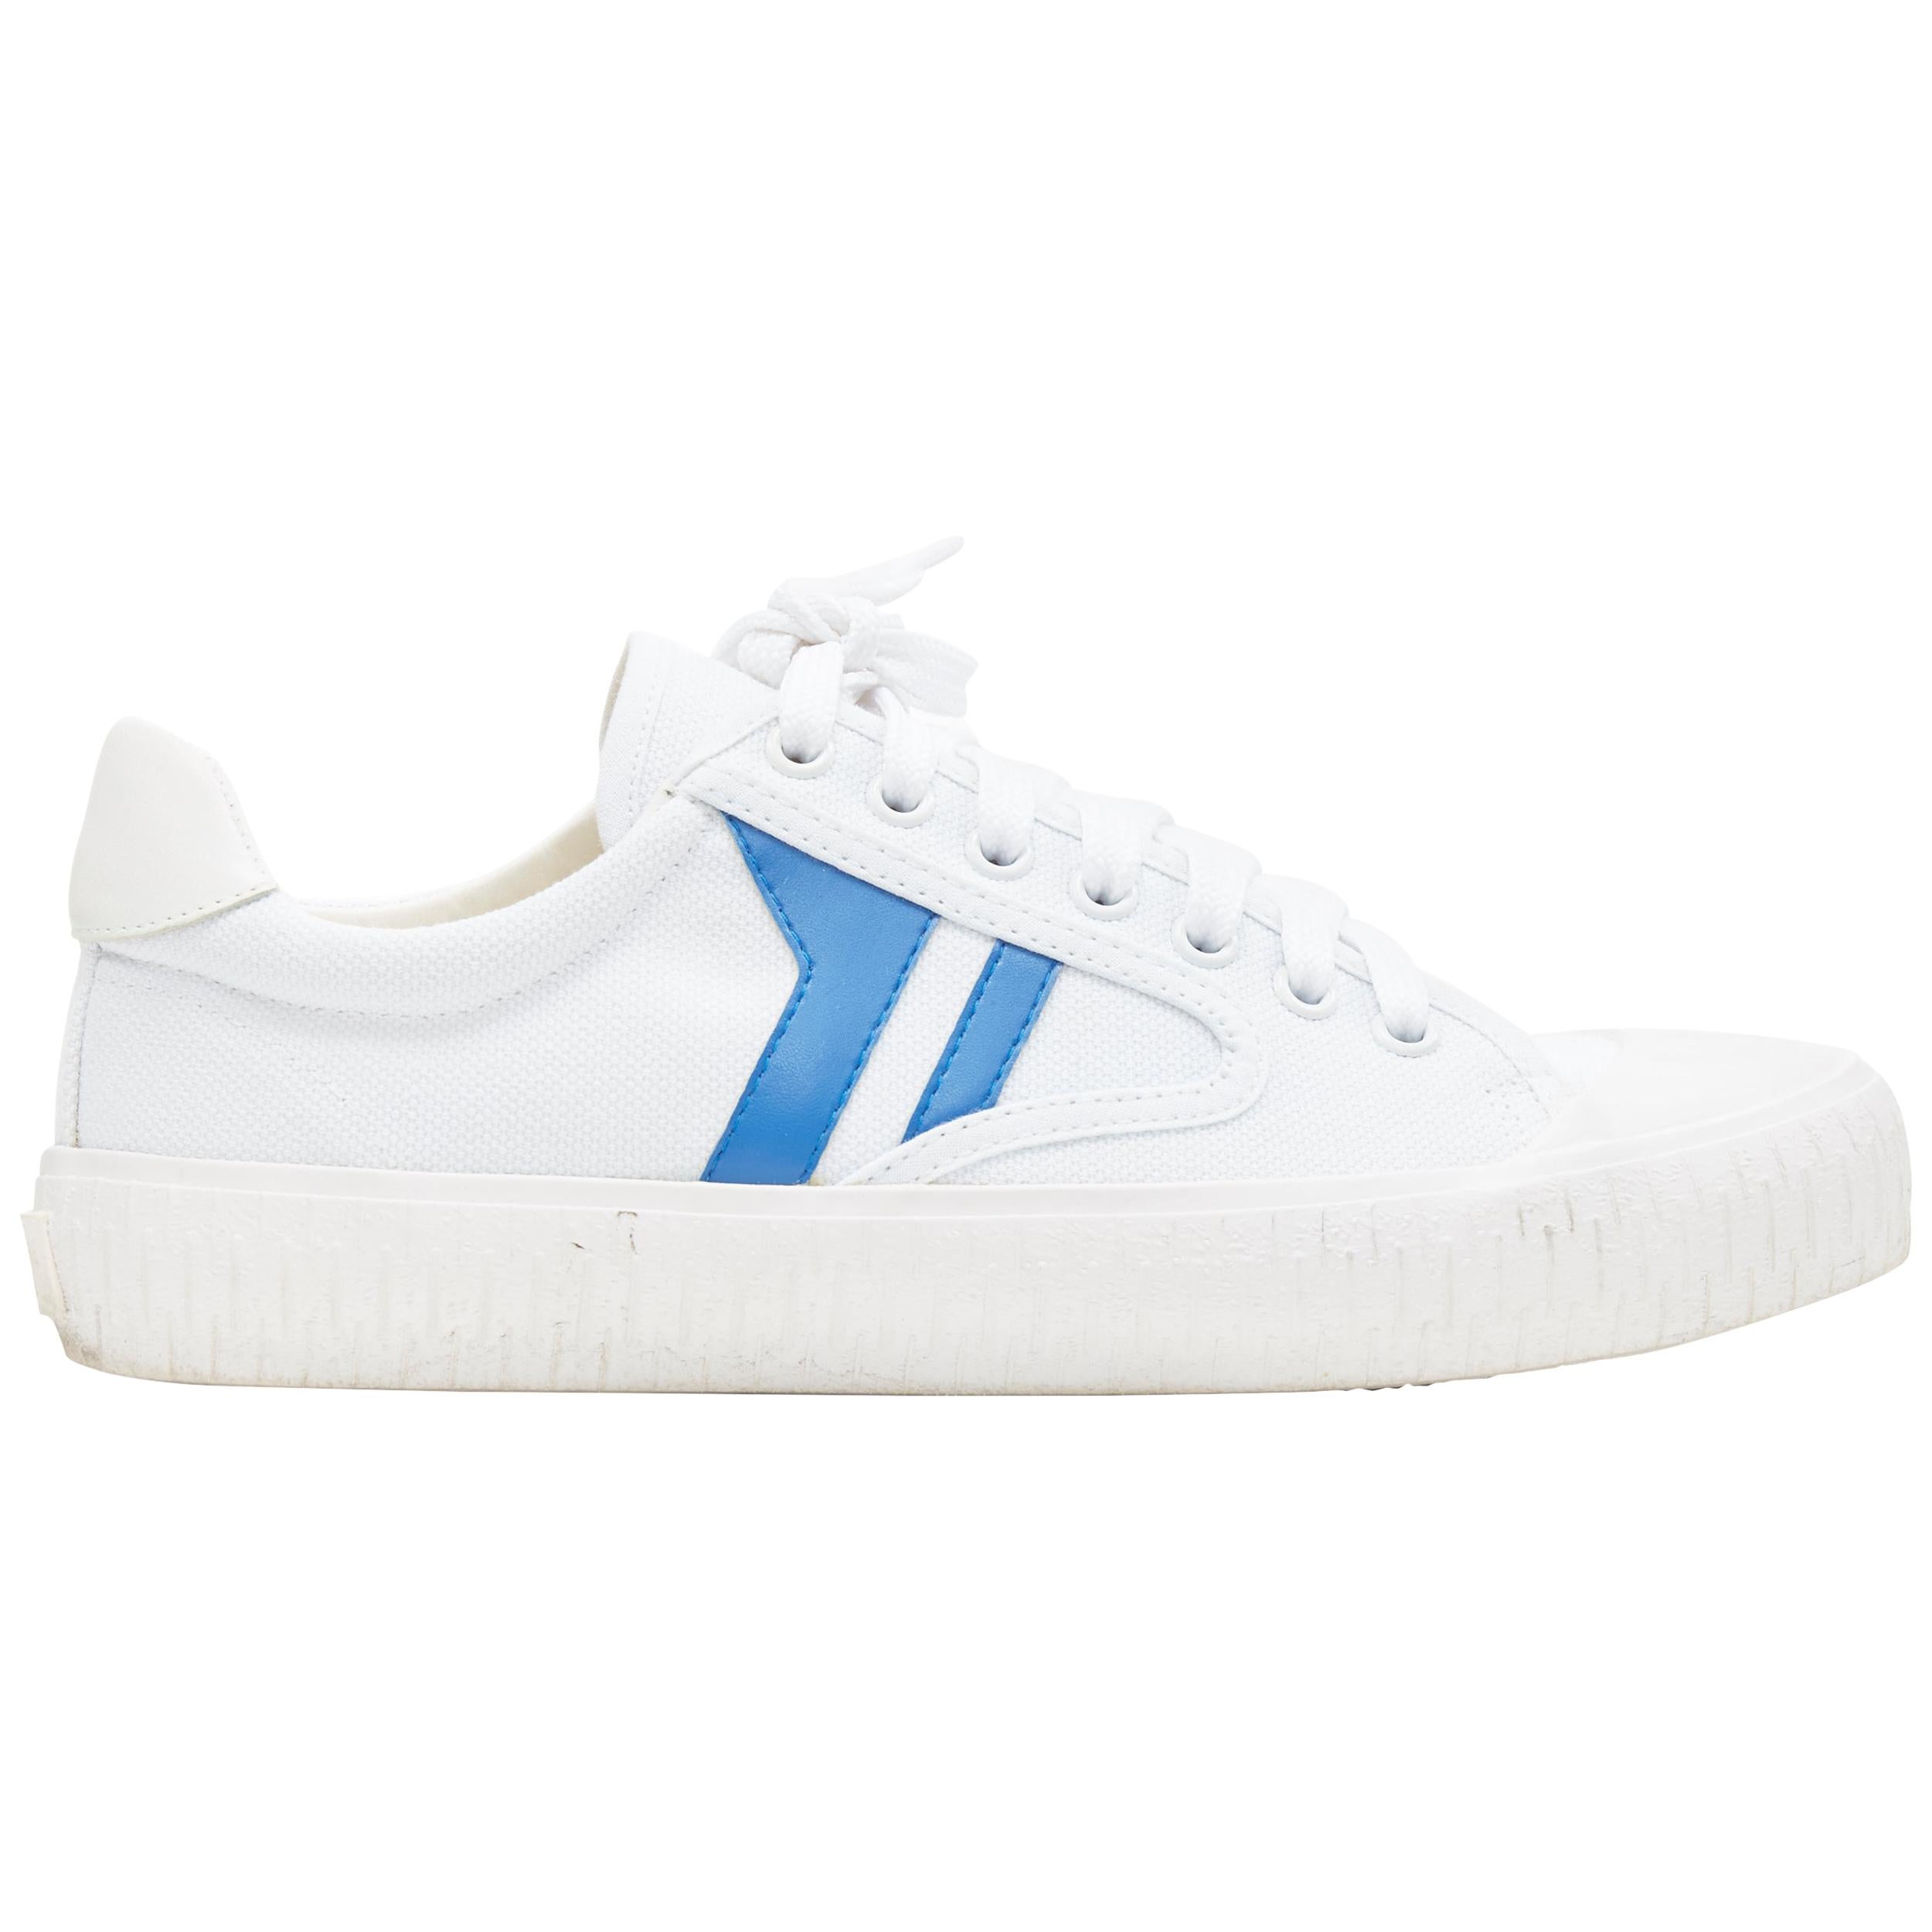 OLD CELINE white blue graphic canvas lace up casusal low top sneakers EU38